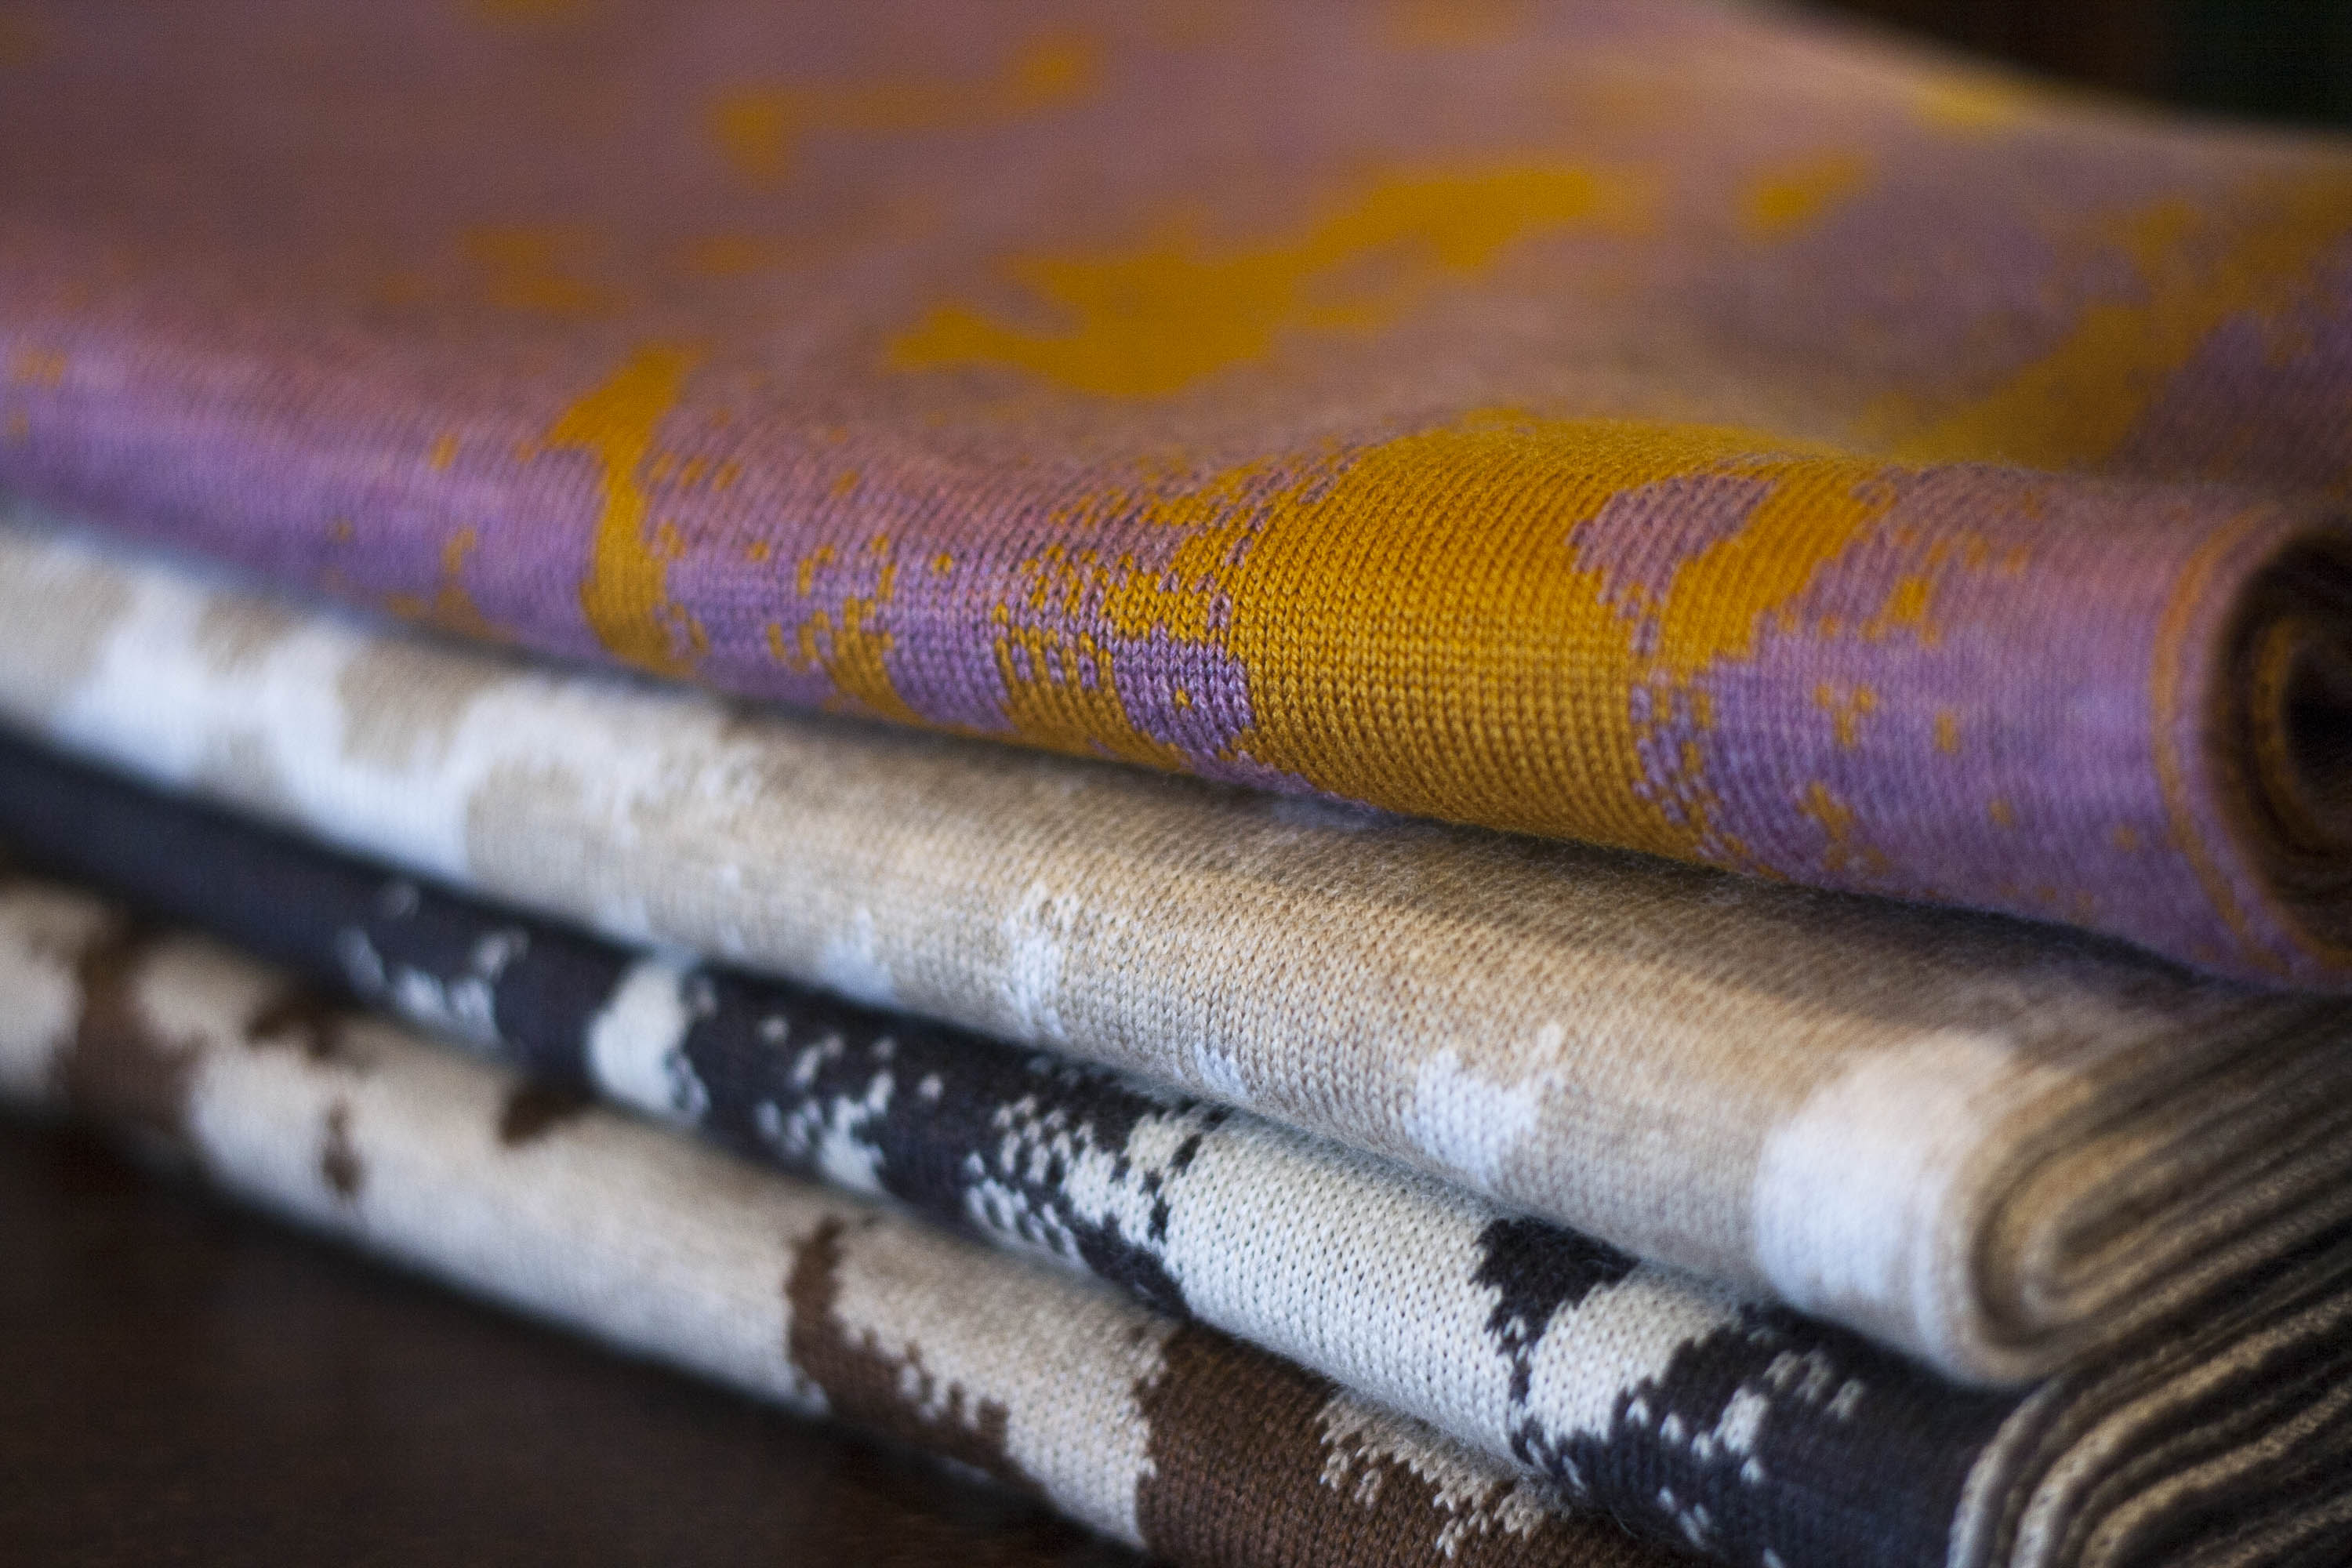 Stack of contemporary Scottish knitwear in extra fine merino wool, these are cowls in an abstract mottled pattern